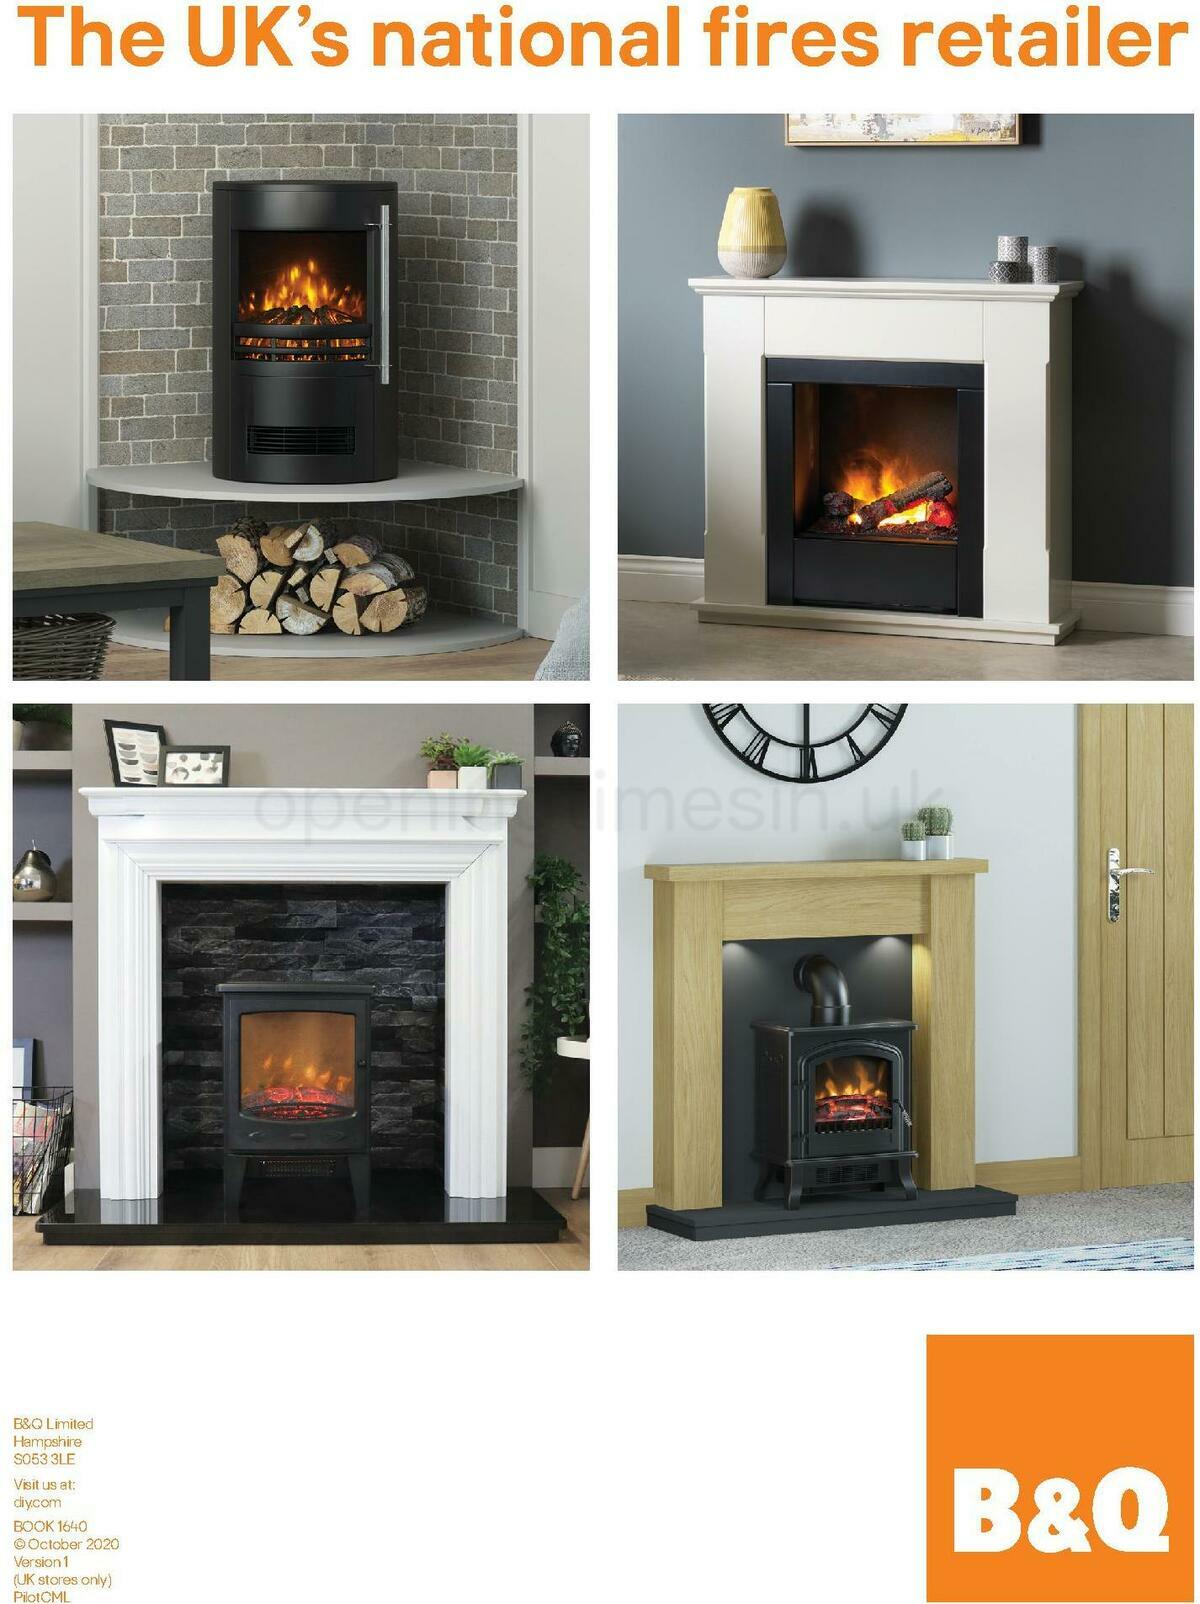 B&Q Fire Collections Offers from 1 November